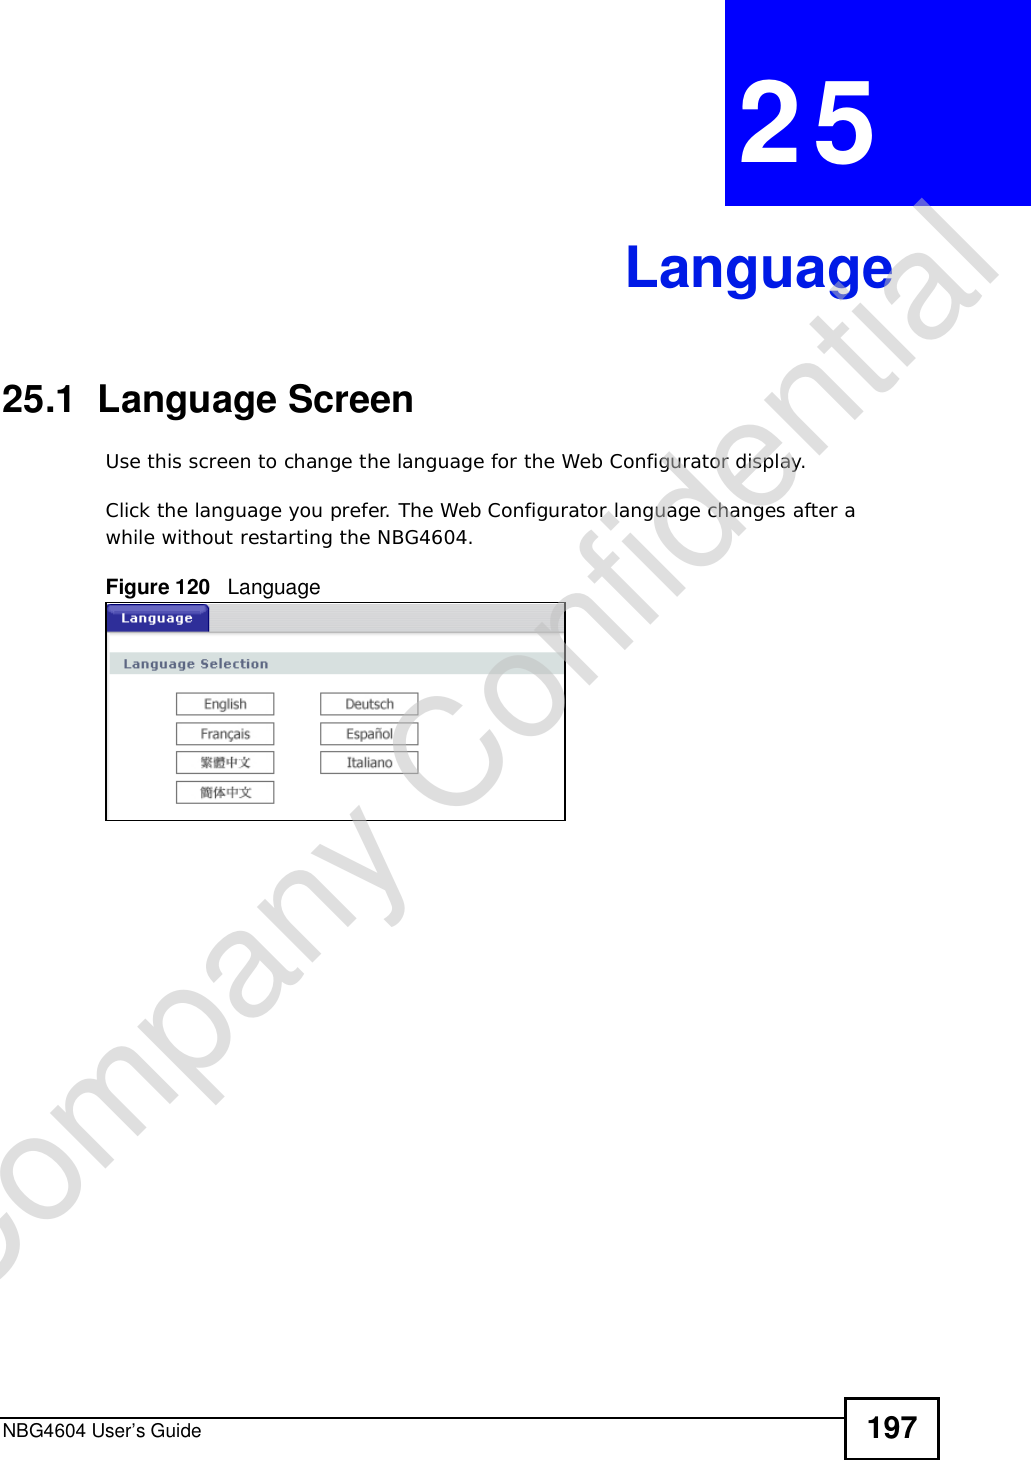 NBG4604 User’s Guide 197CHAPTER 25Language25.1  Language ScreenUse this screen to change the language for the Web Configurator display.Click the language you prefer. The Web Configurator language changes after a while without restarting the NBG4604.Figure 120   LanguageCompany Confidential